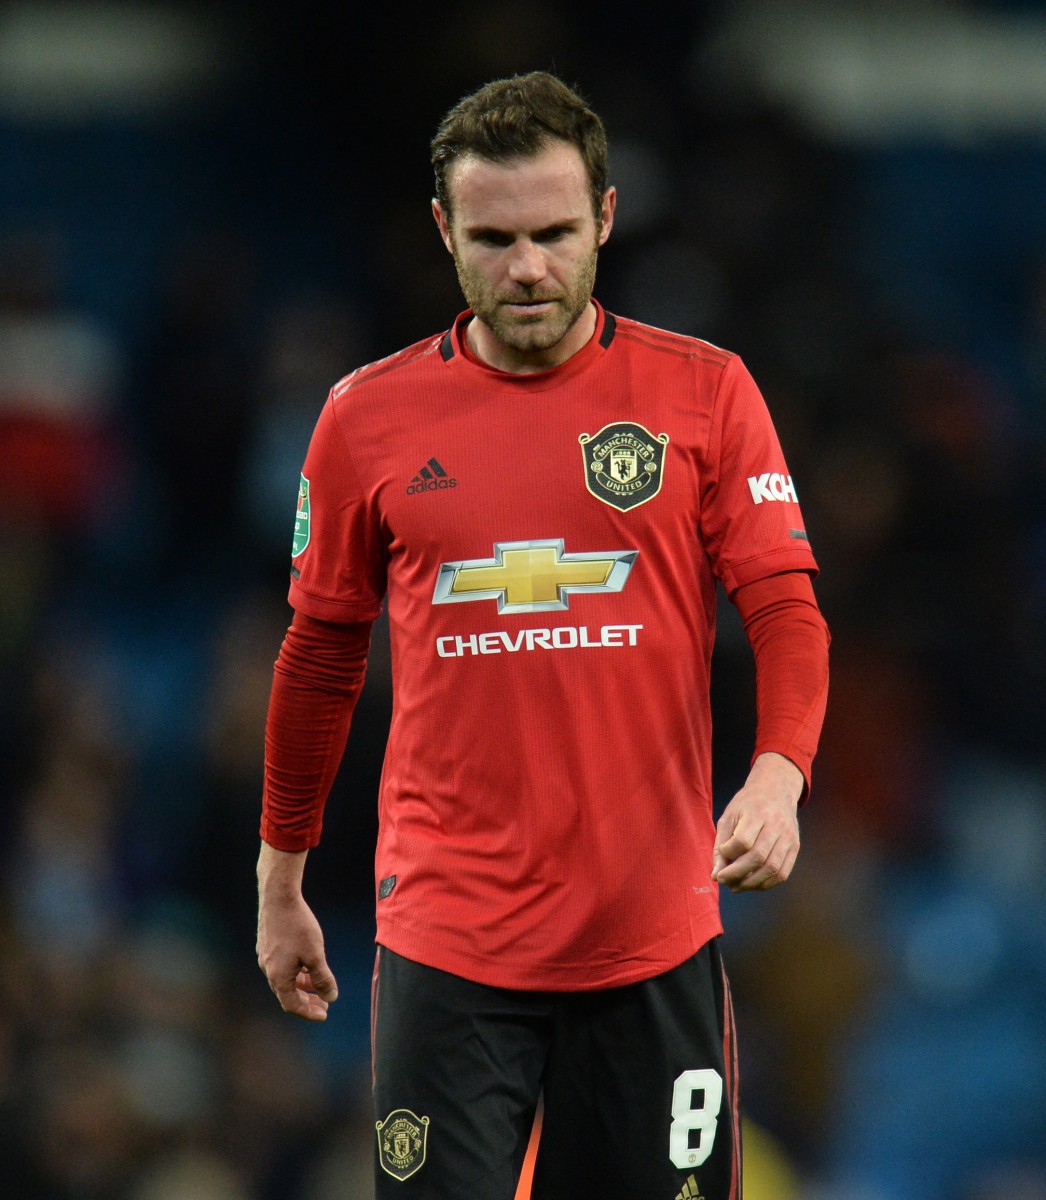 , Cesc Fabregas and Ferdinand stunned as Man Utd star Fred takes free-kick ahead of Mata vs City  and blasts it into wall